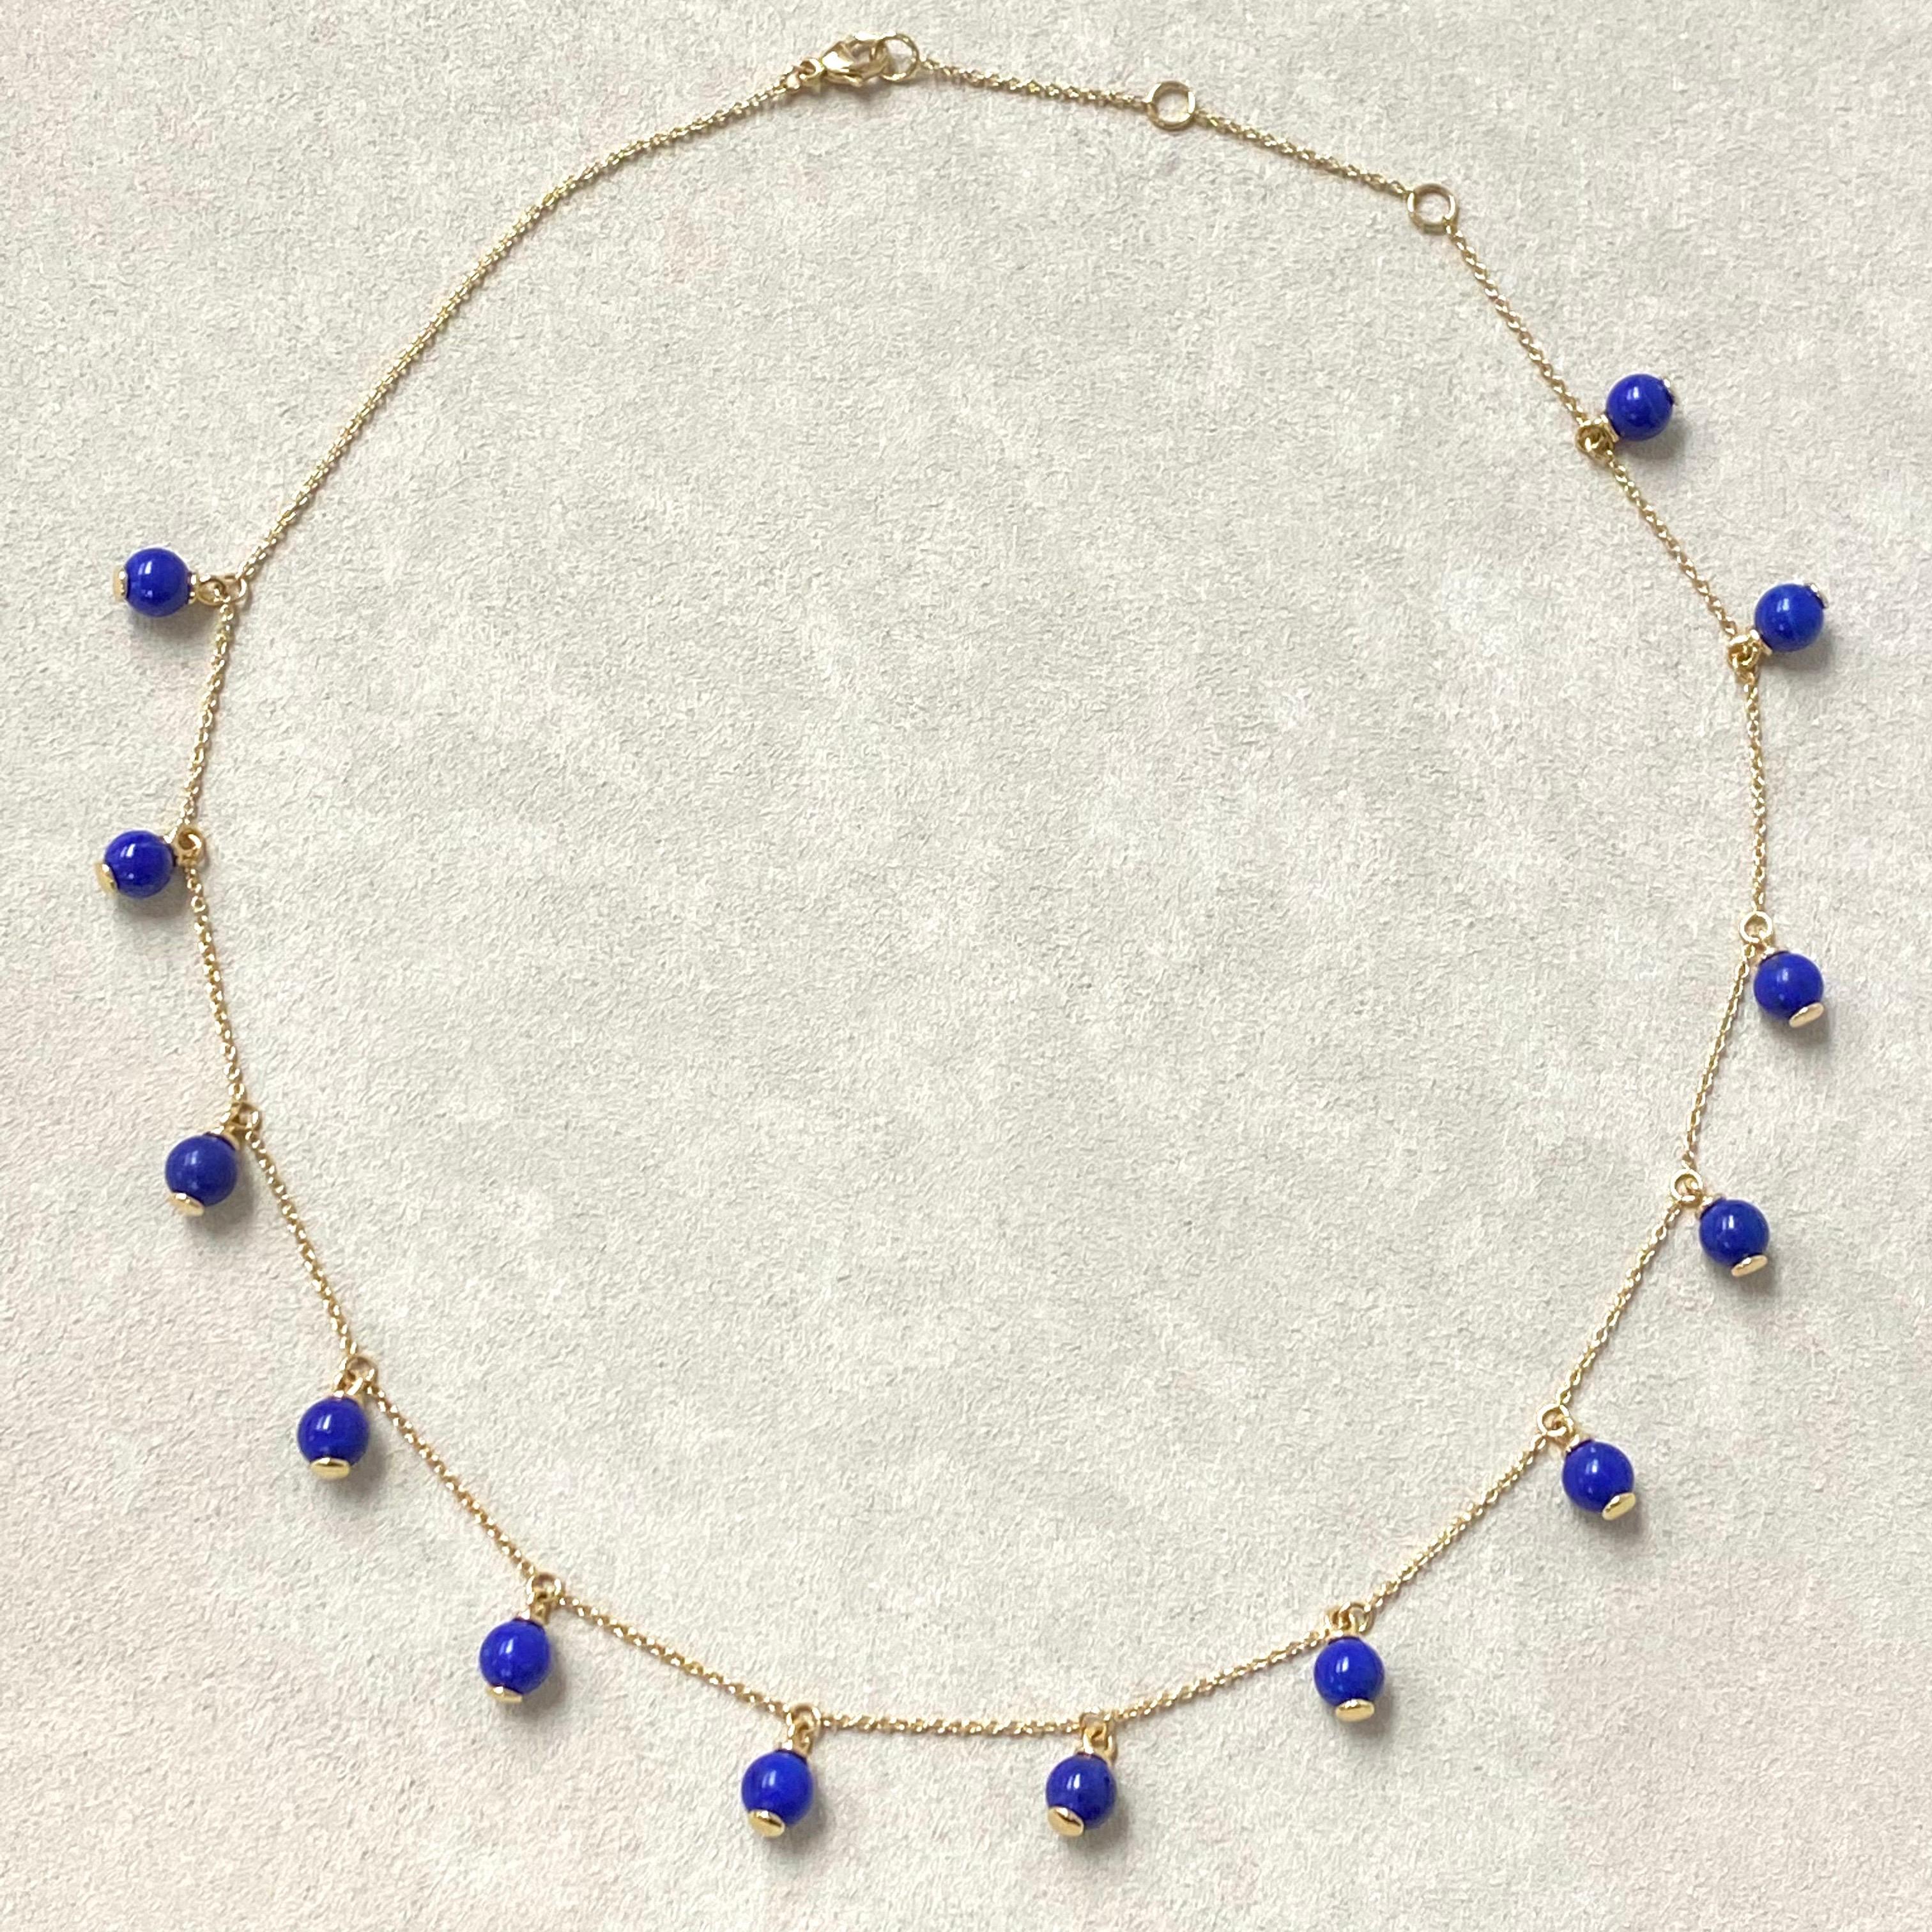 Created in 18 karat yellow gold
18 inch length
Lapis Lazuli  beads 20 carats approx.
18kyg lobster clasp
Limited edition

Fashioned from lustrous 18 karat yellow gold, this distinguished necklace boasts a stately 18 inch length with magnificent